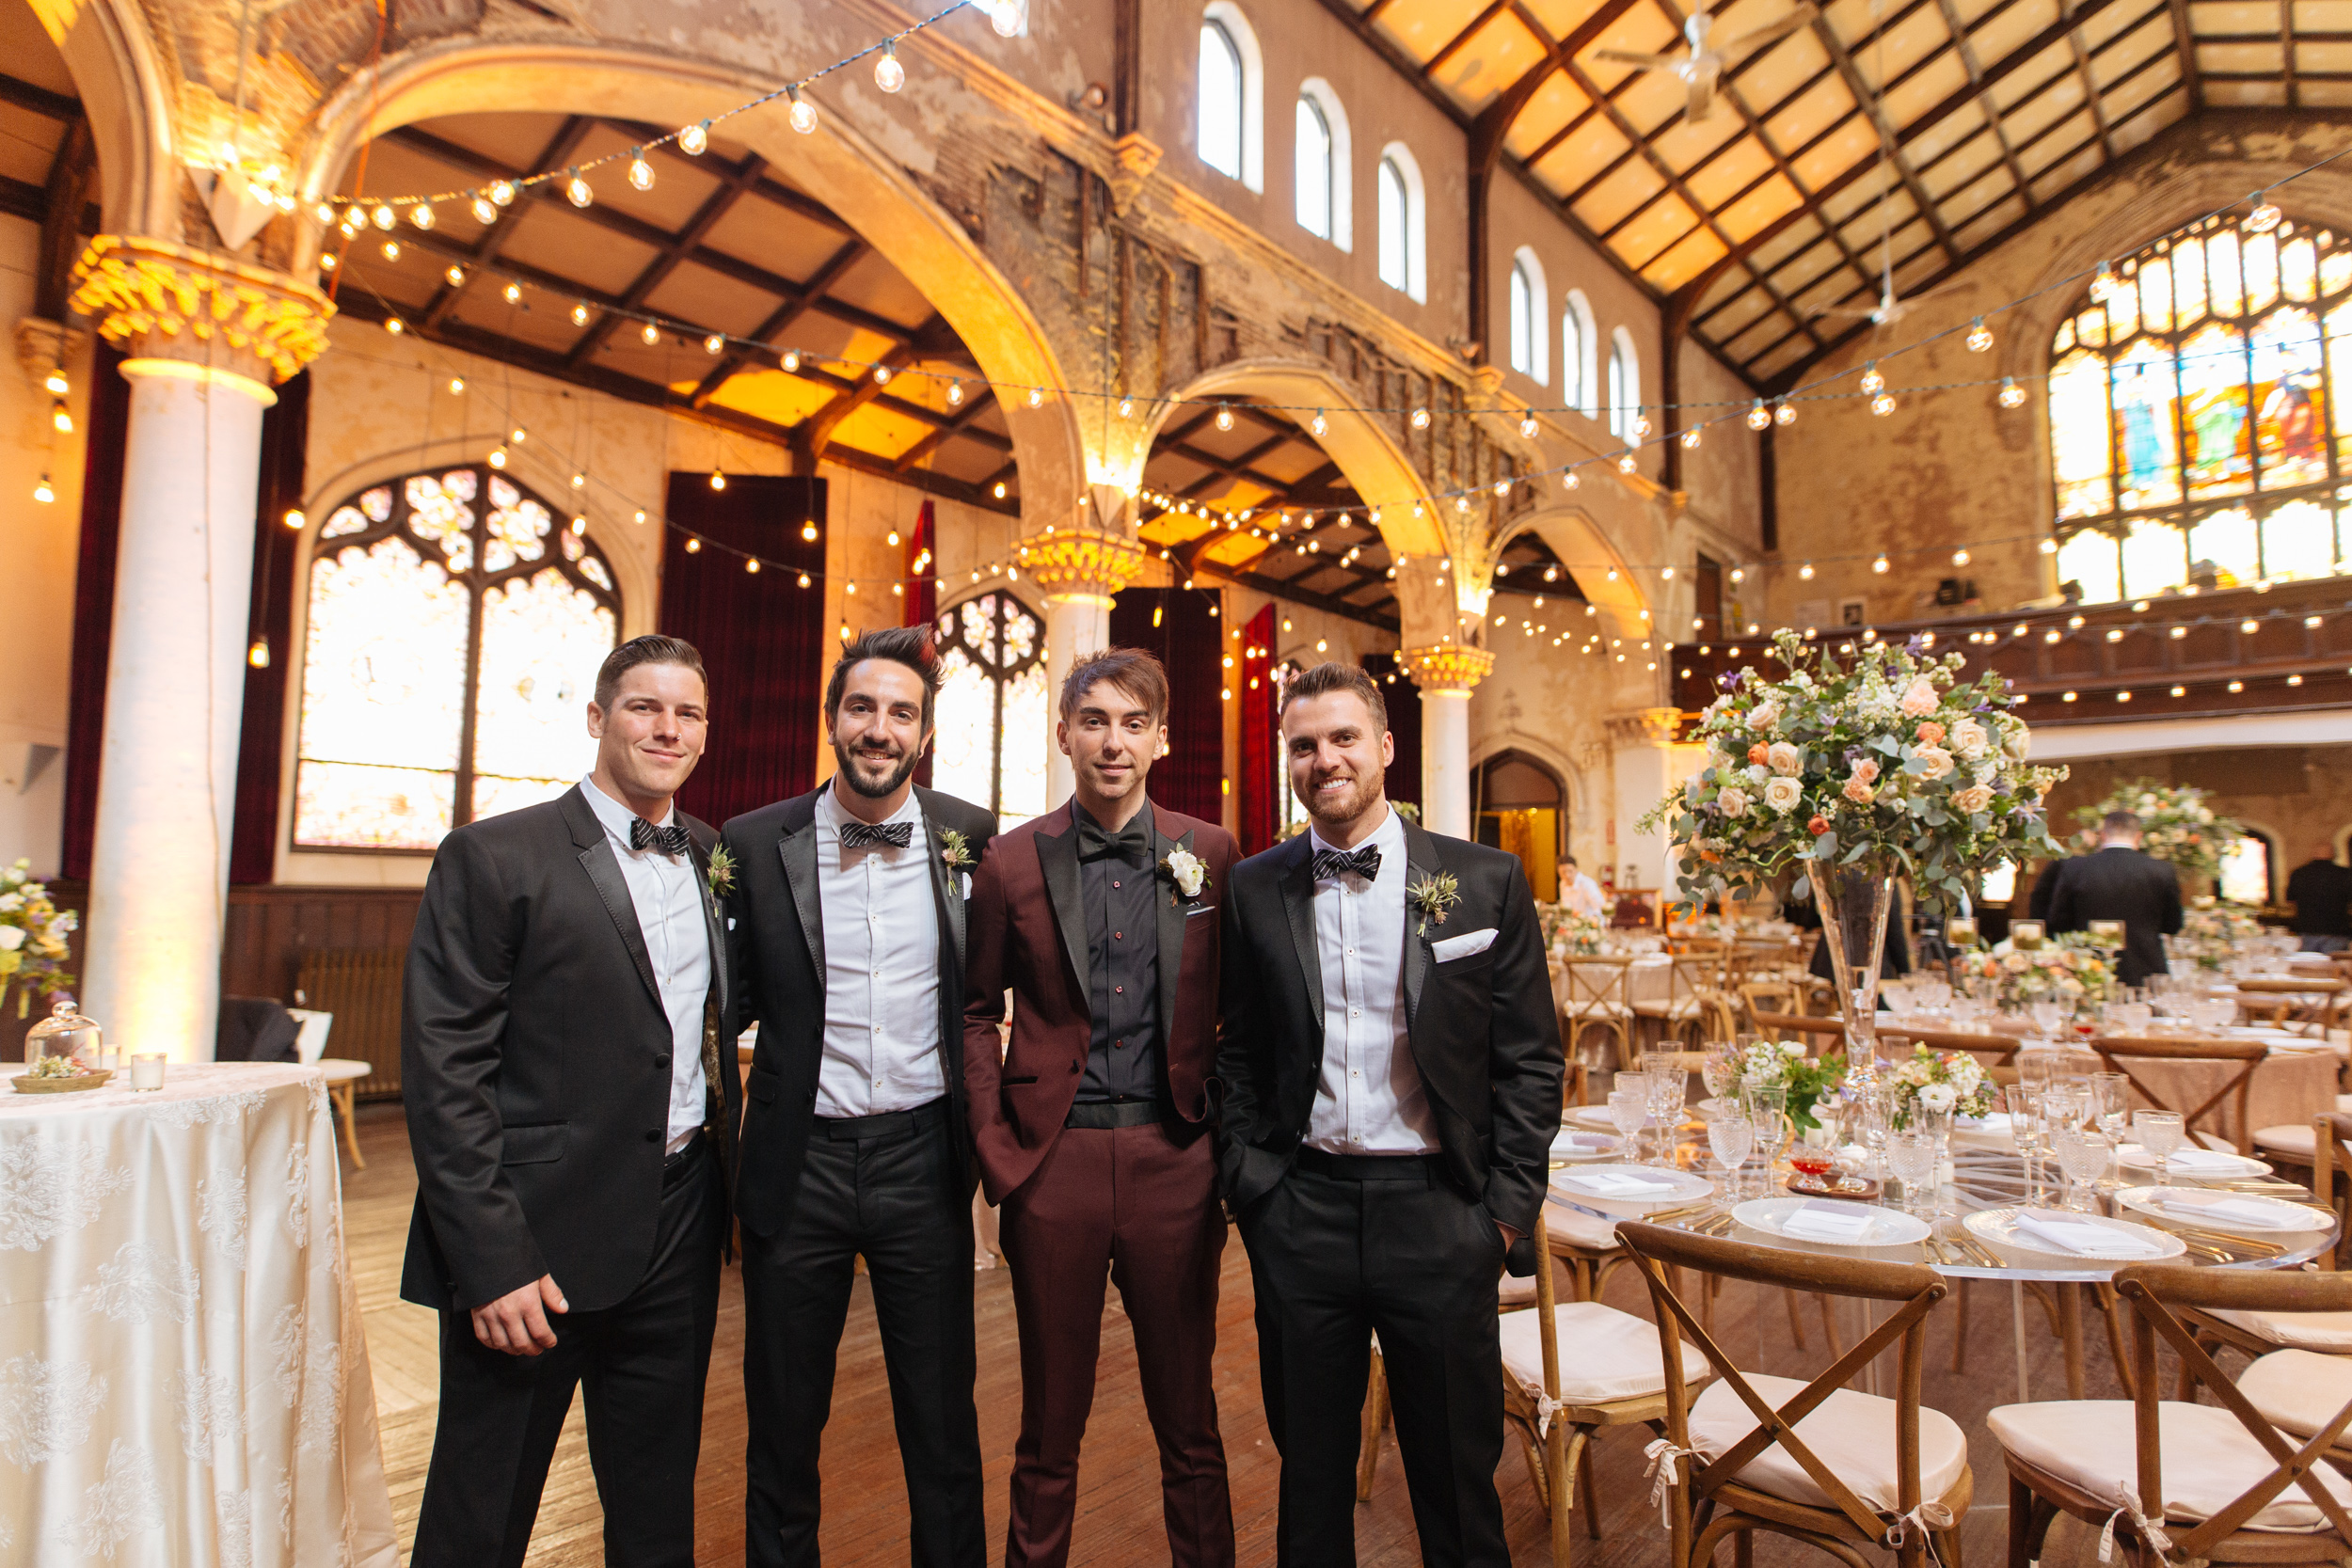 All Time Low at the Wedding Reception
